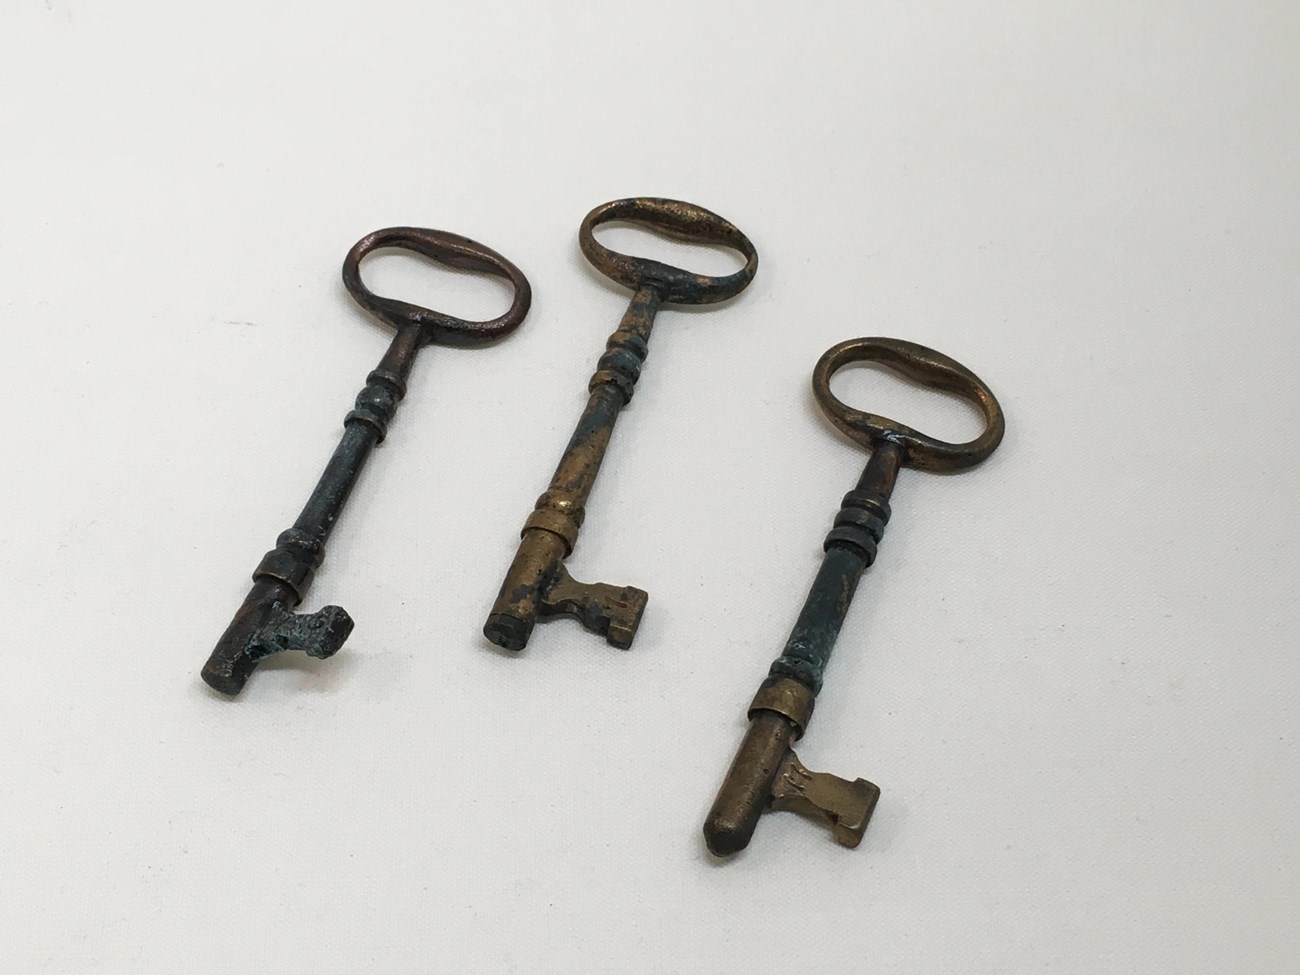 Three skeleton keys about 6 inches long. They are tarnished and pitted, but otherwise in good condition.